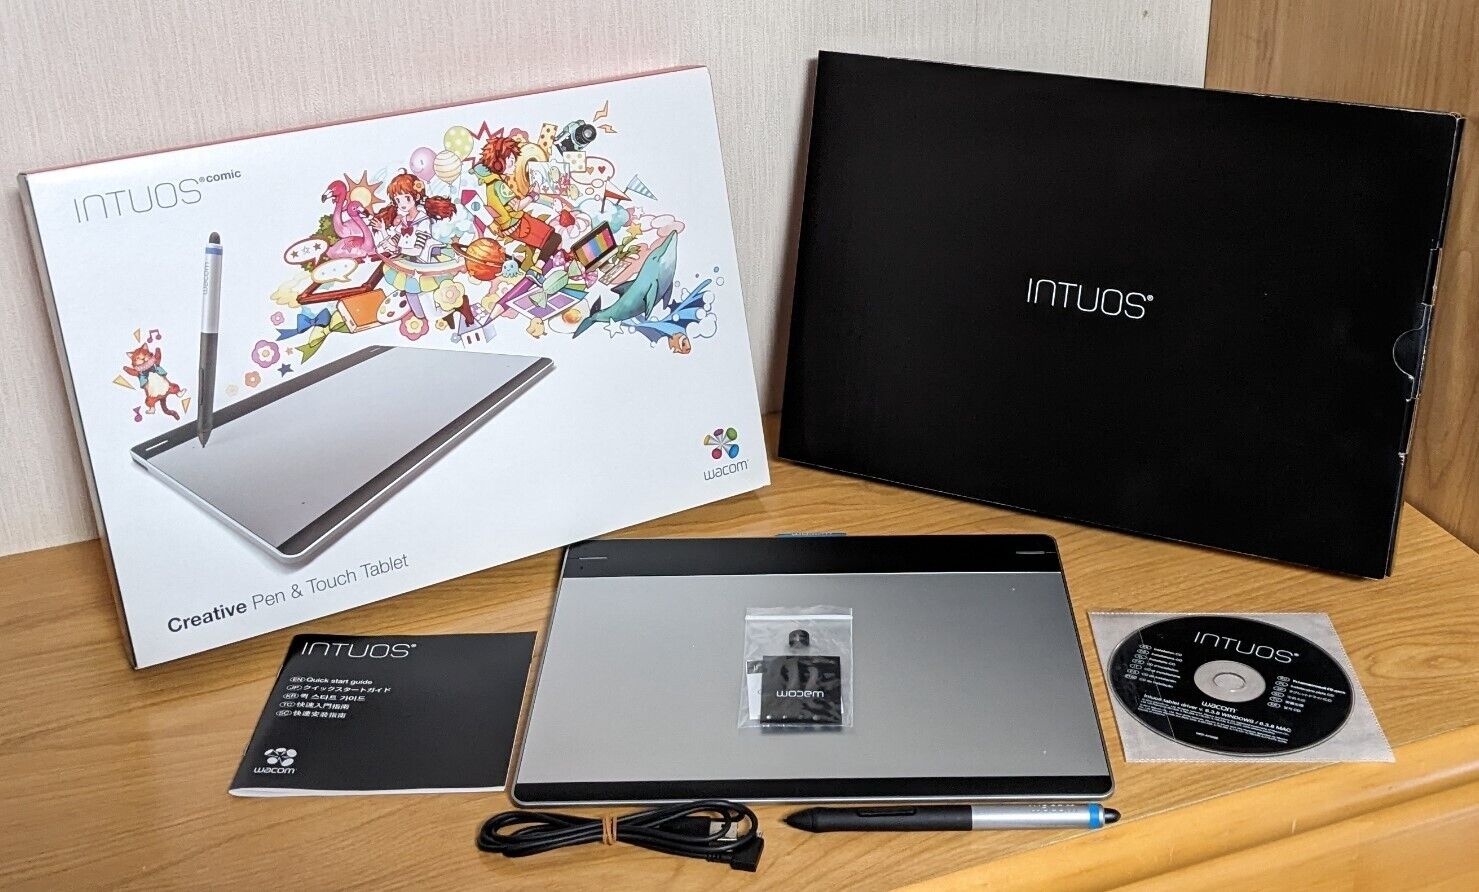 Wacom CTH-680 Intuos Medium Creative Pen & Touch Tablet Full set with Box